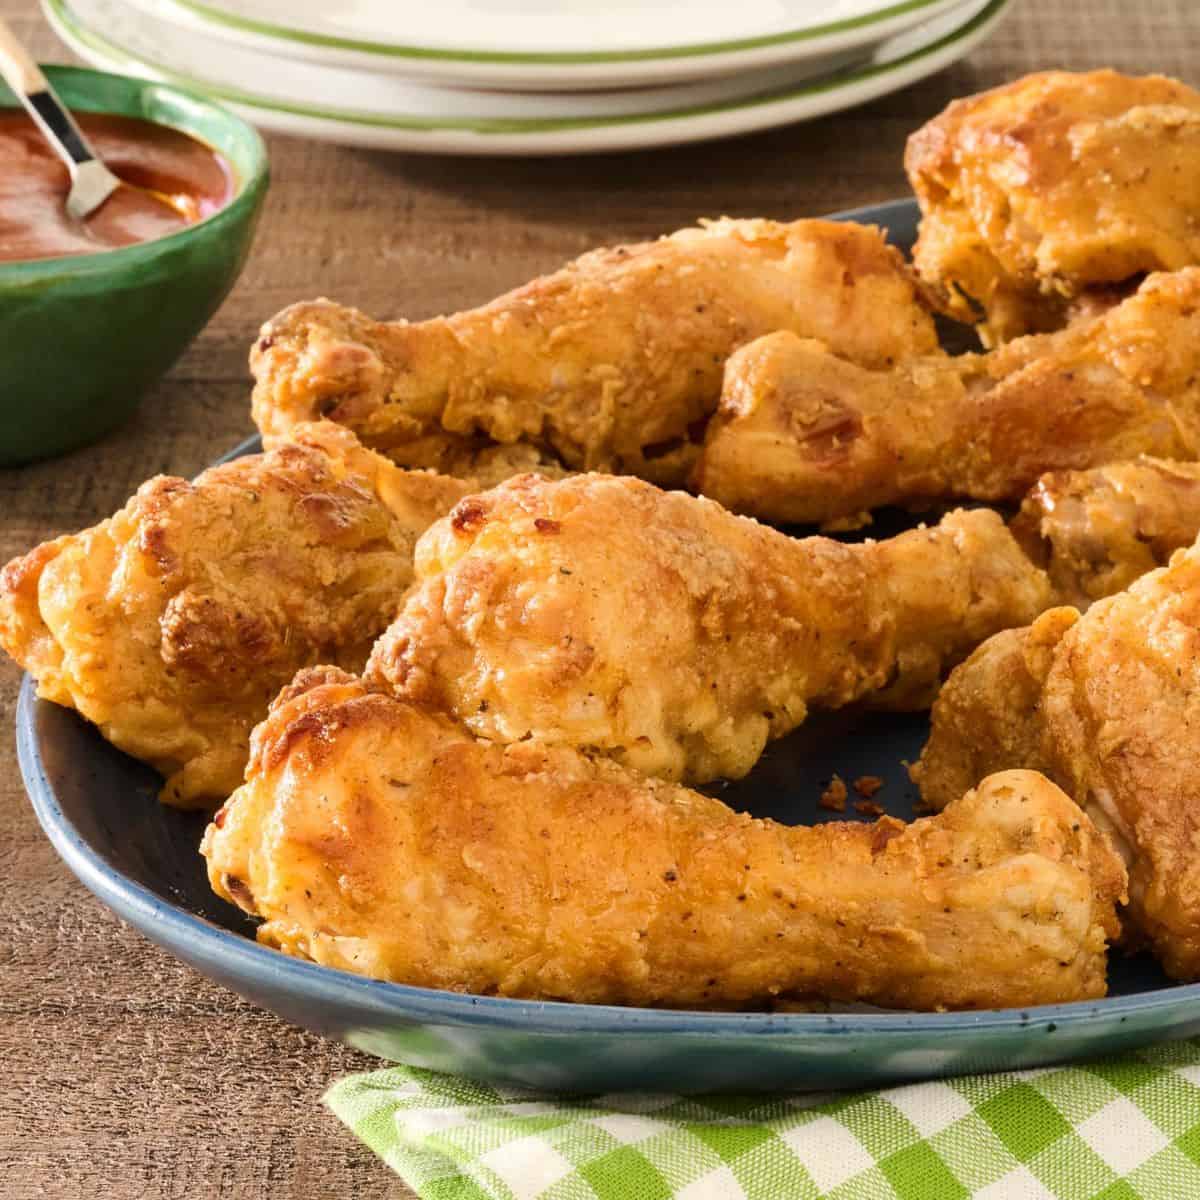 grill-fried-chicken-recipe from The Pioneer Woman